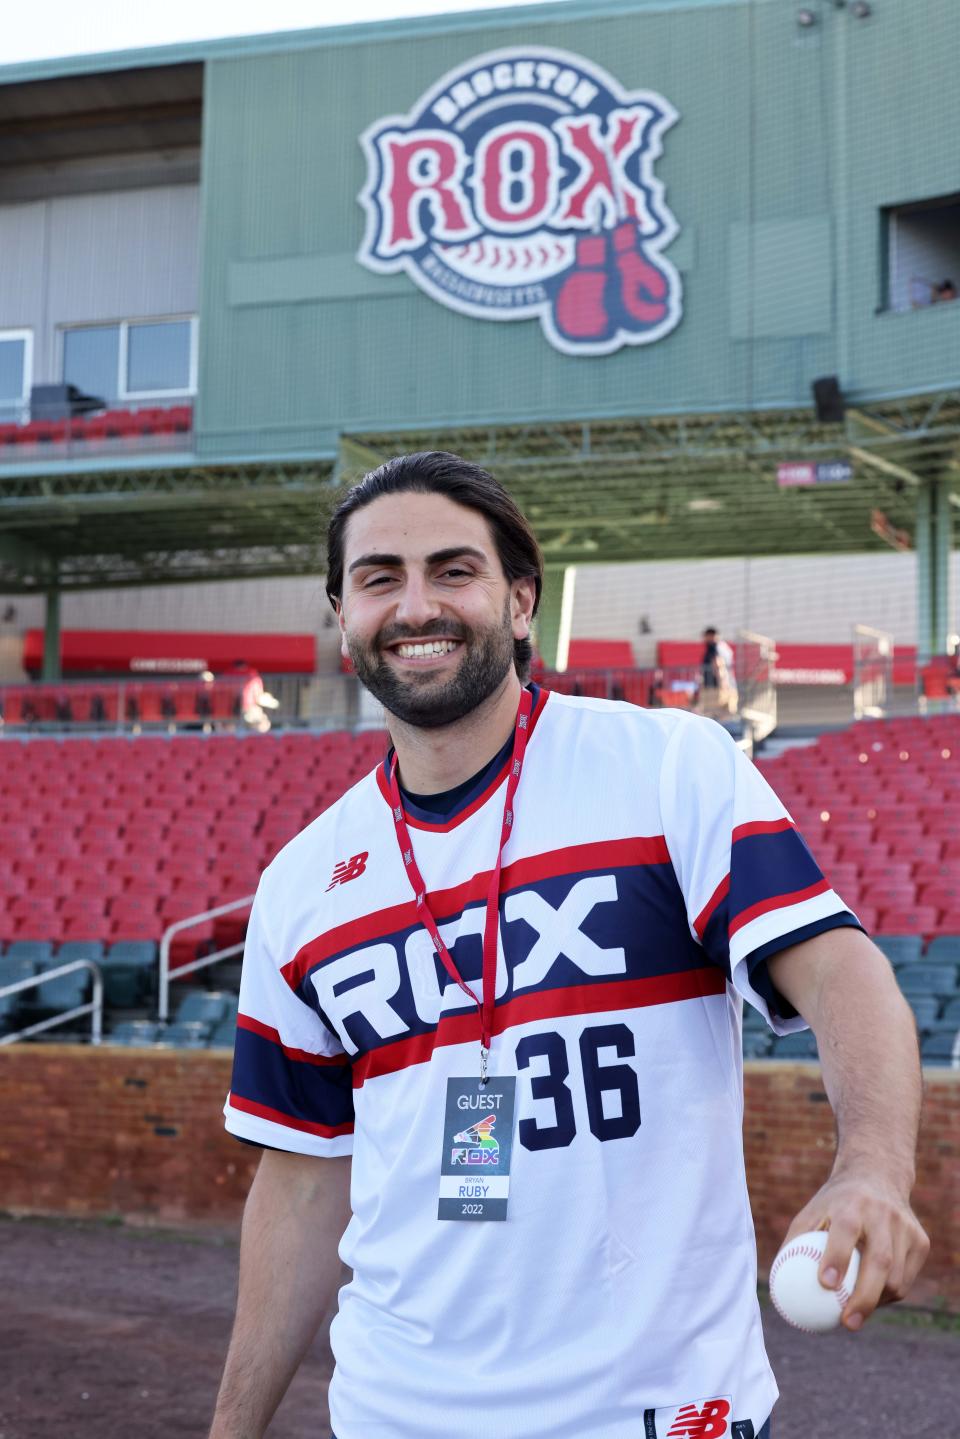 Former Brockton Rox assistant coach Bryan Ruby returns to Campanelli Stadium to throw out the first pitch and sing the national anthem on Tuesday, June 21, 2022. Ruby is a trailblazing professional baseball player and country music artist based in Nashville, Tennessee and in September 2021 he became the the only active professional baseball player to come out as gay.